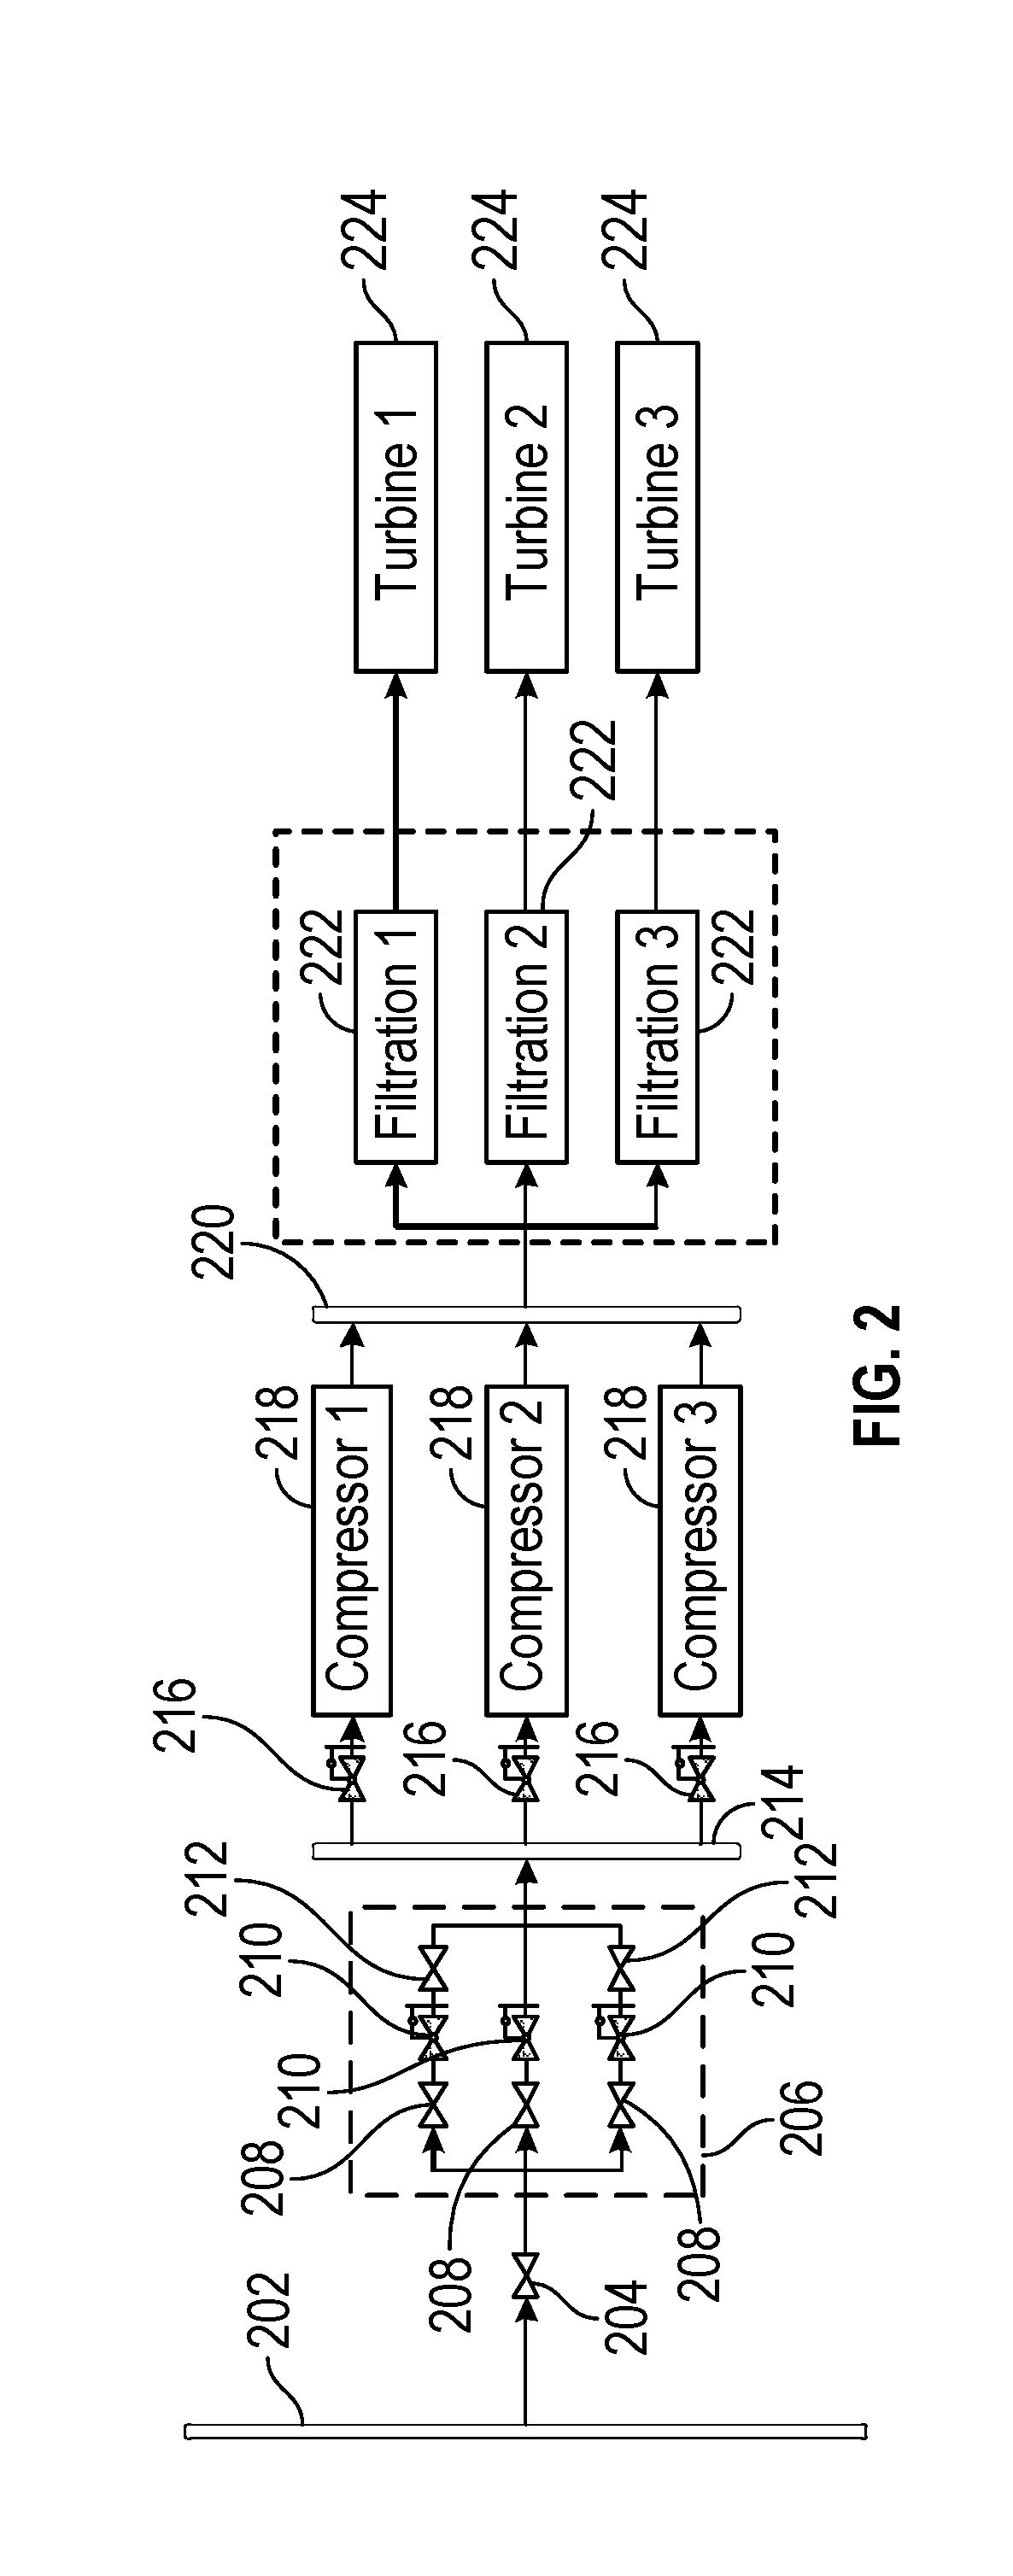 System for gas compression on electric hydraulic fracturing fleets